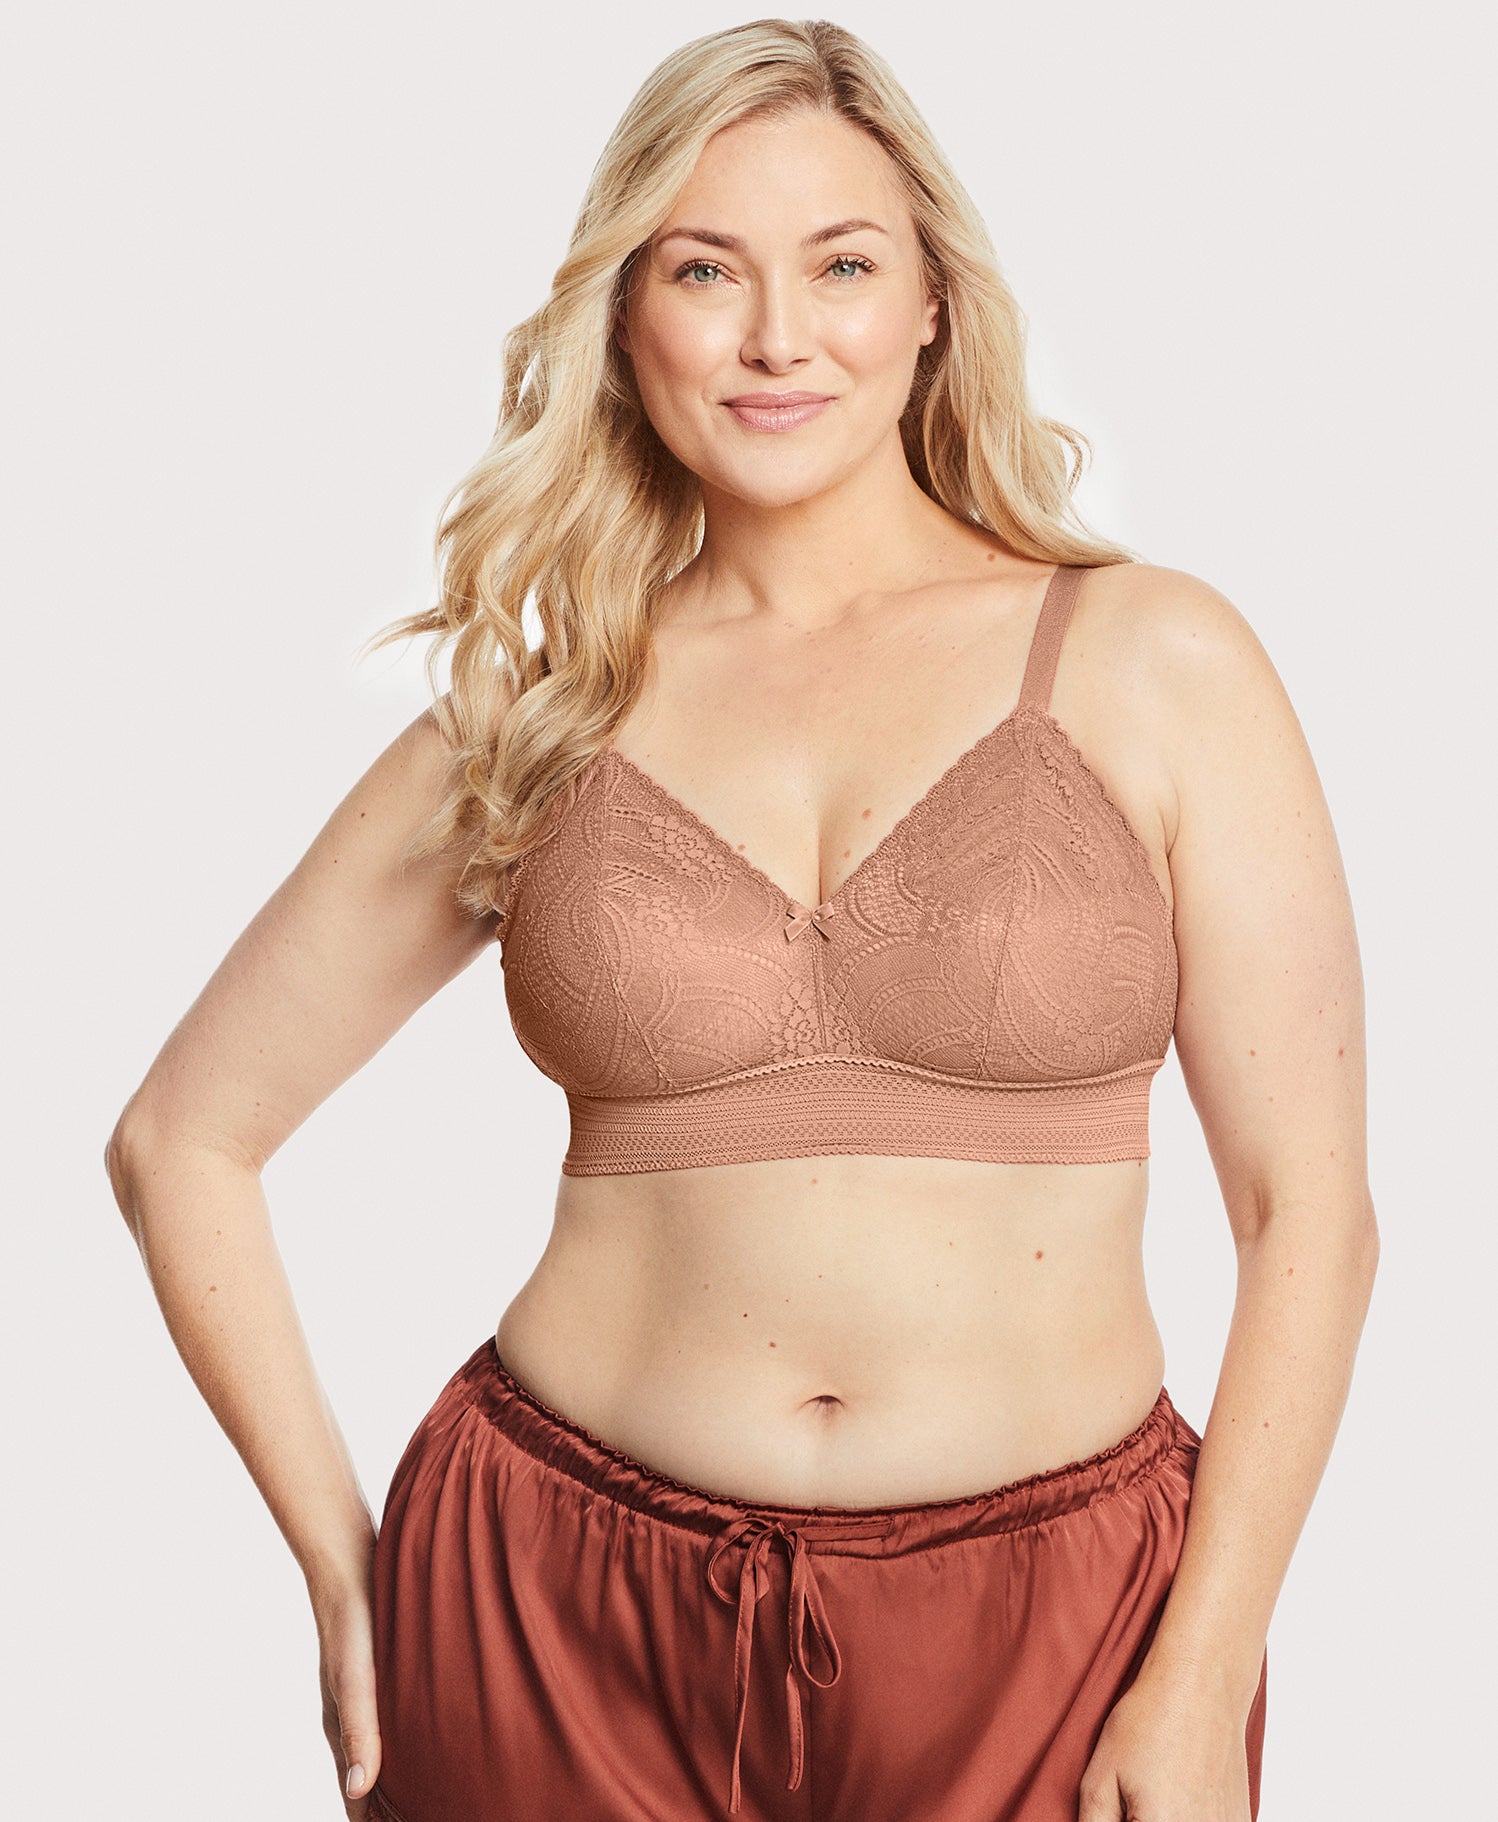 Bramour by Glamorise Women's Full Figure Plus Size Underwire Front